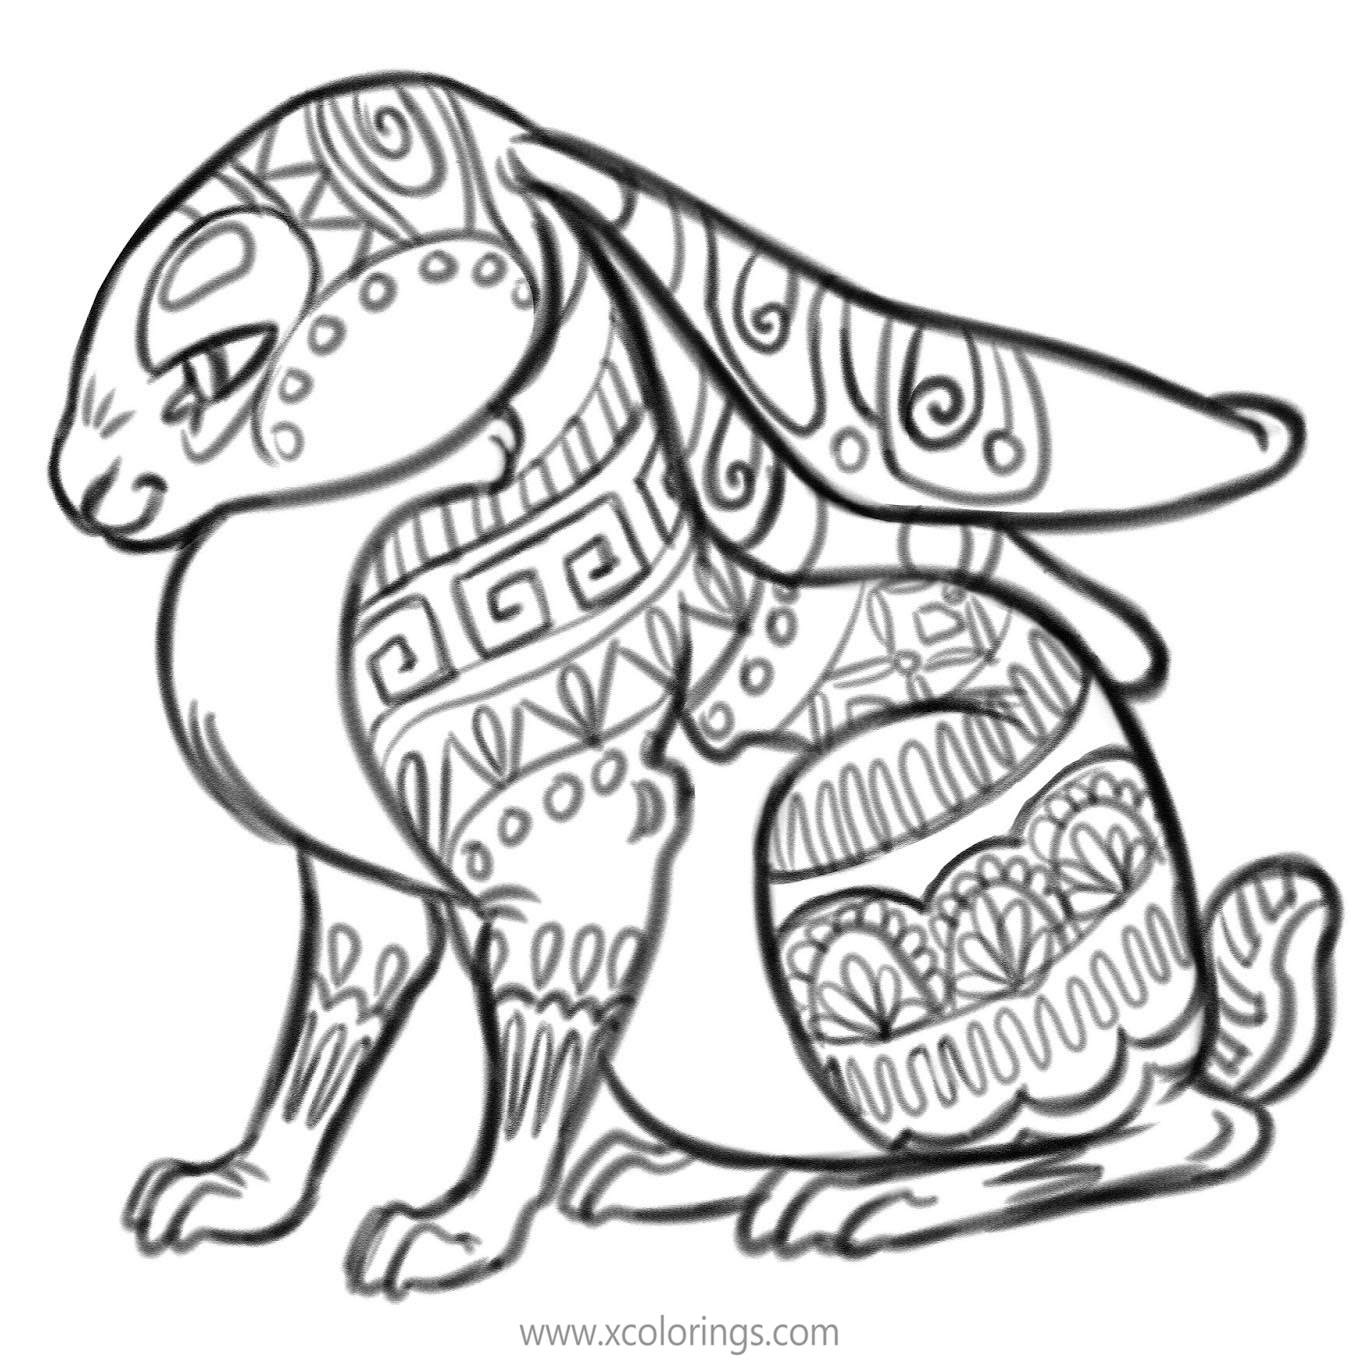 Free Alebrije Rabbit Coloring Pages Black and White printable